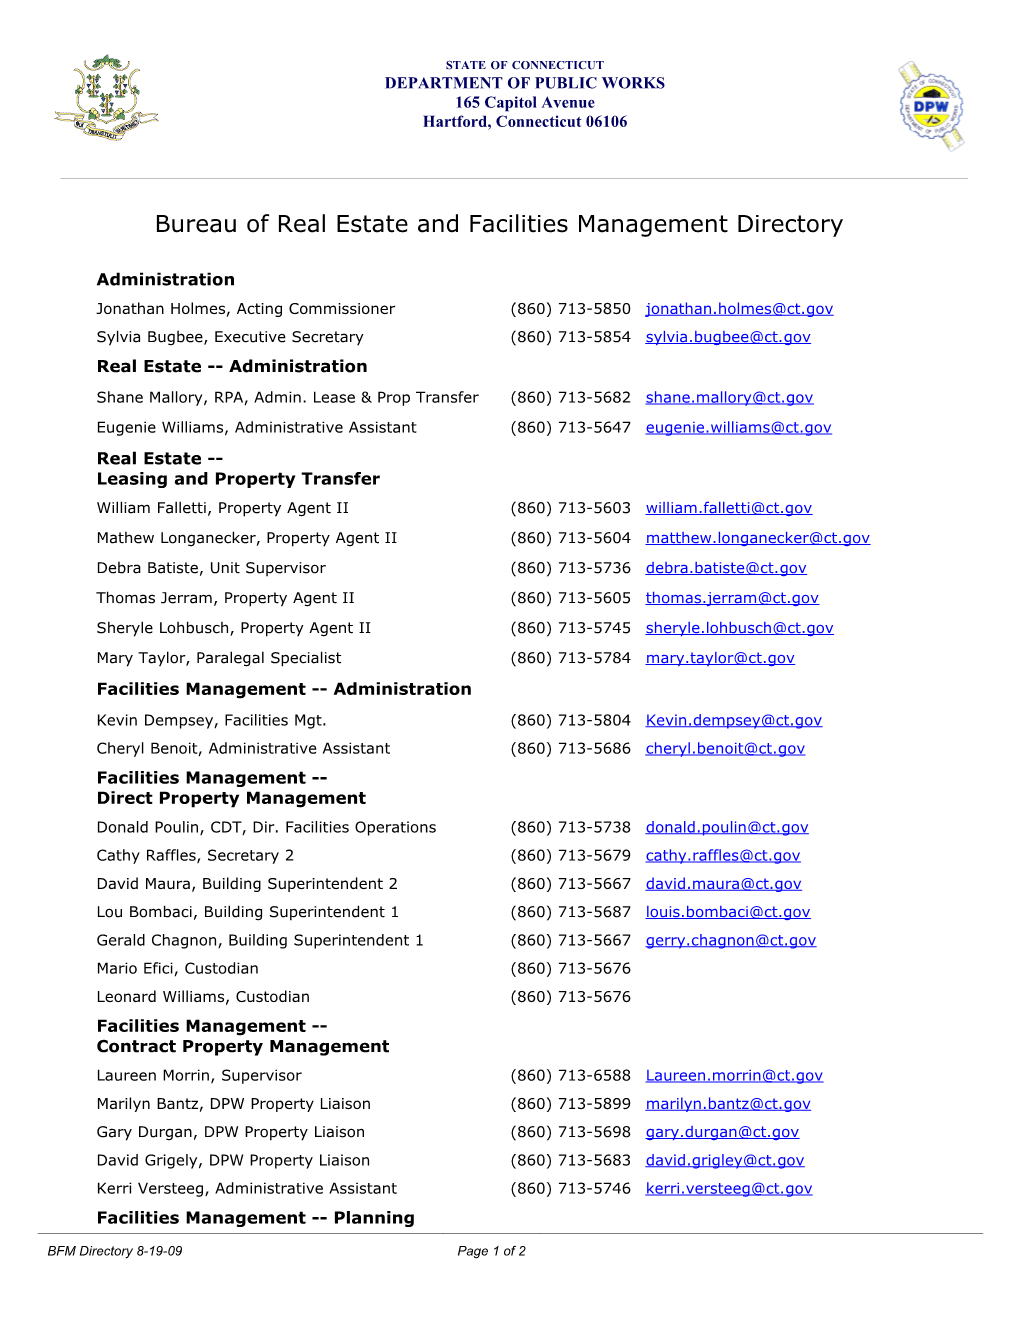 Bureau of Real Estate and Facilities Management Directory